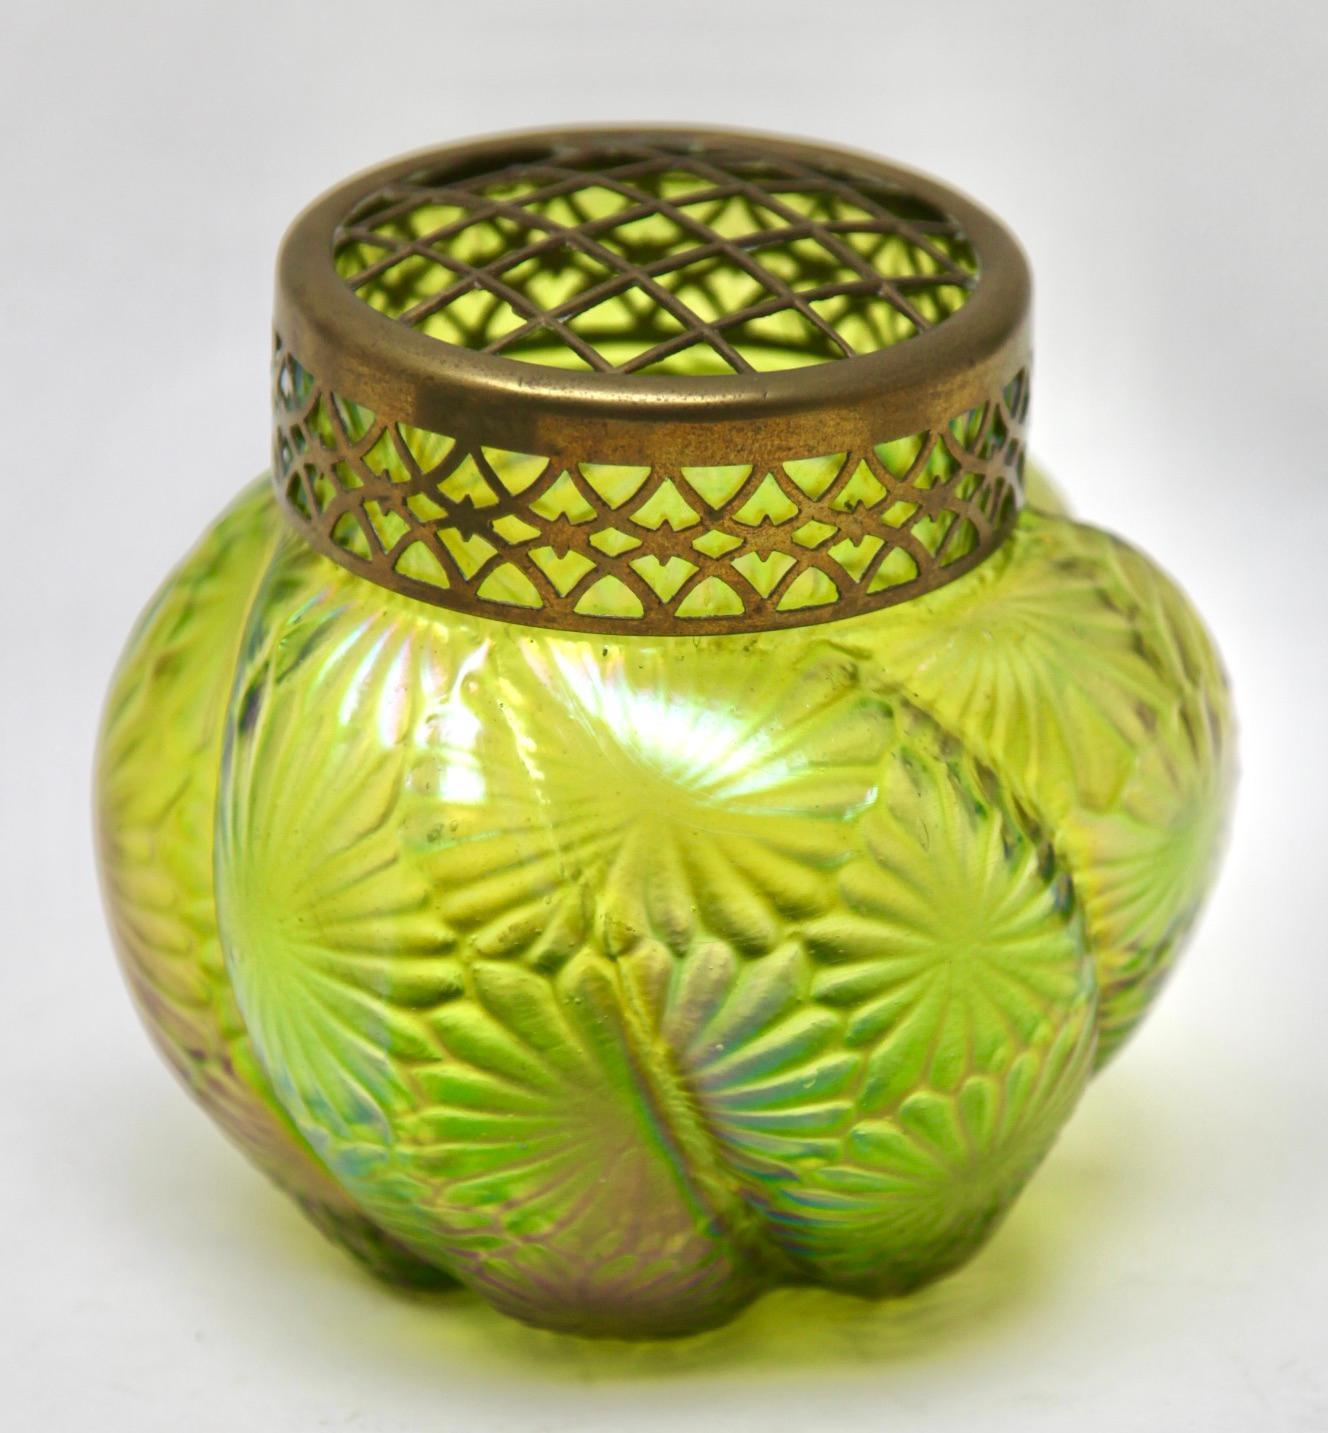 Art Nouveau iridescent glass Pique Fleurs' vase by Loetz' with Grille

Subtle, hand blown glass vase in the Art Deco style. This design for vases is often called 'Pique fleurs' or 'rose-bowl' and is supplied with a fitted metal grille to support